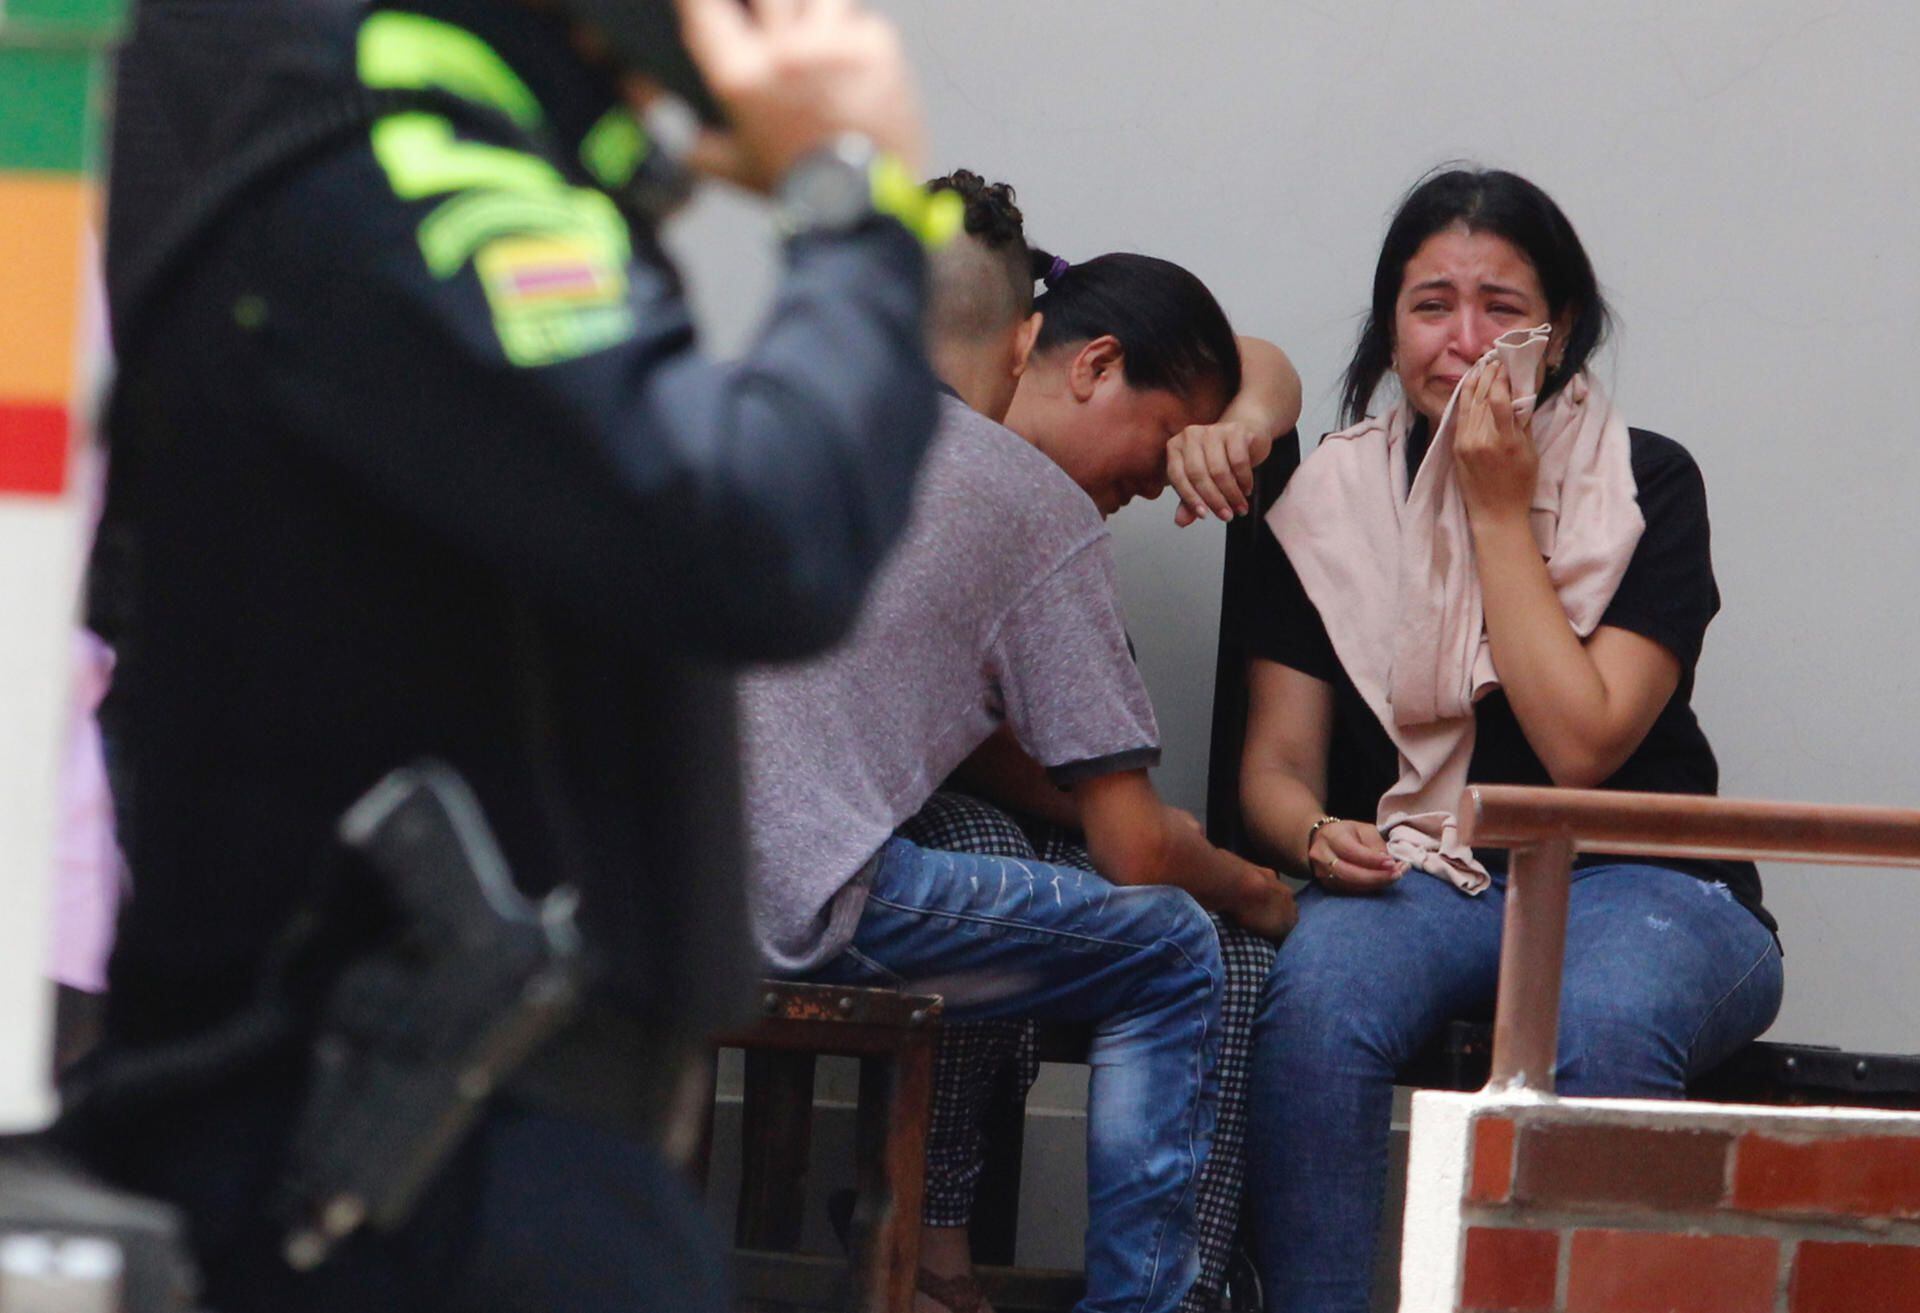 Relatives cry after the murder of a policeman, today, in the municipality of El Zulia, in the department of Norte Santander (Colombia).  EFE / Mario Caicedo